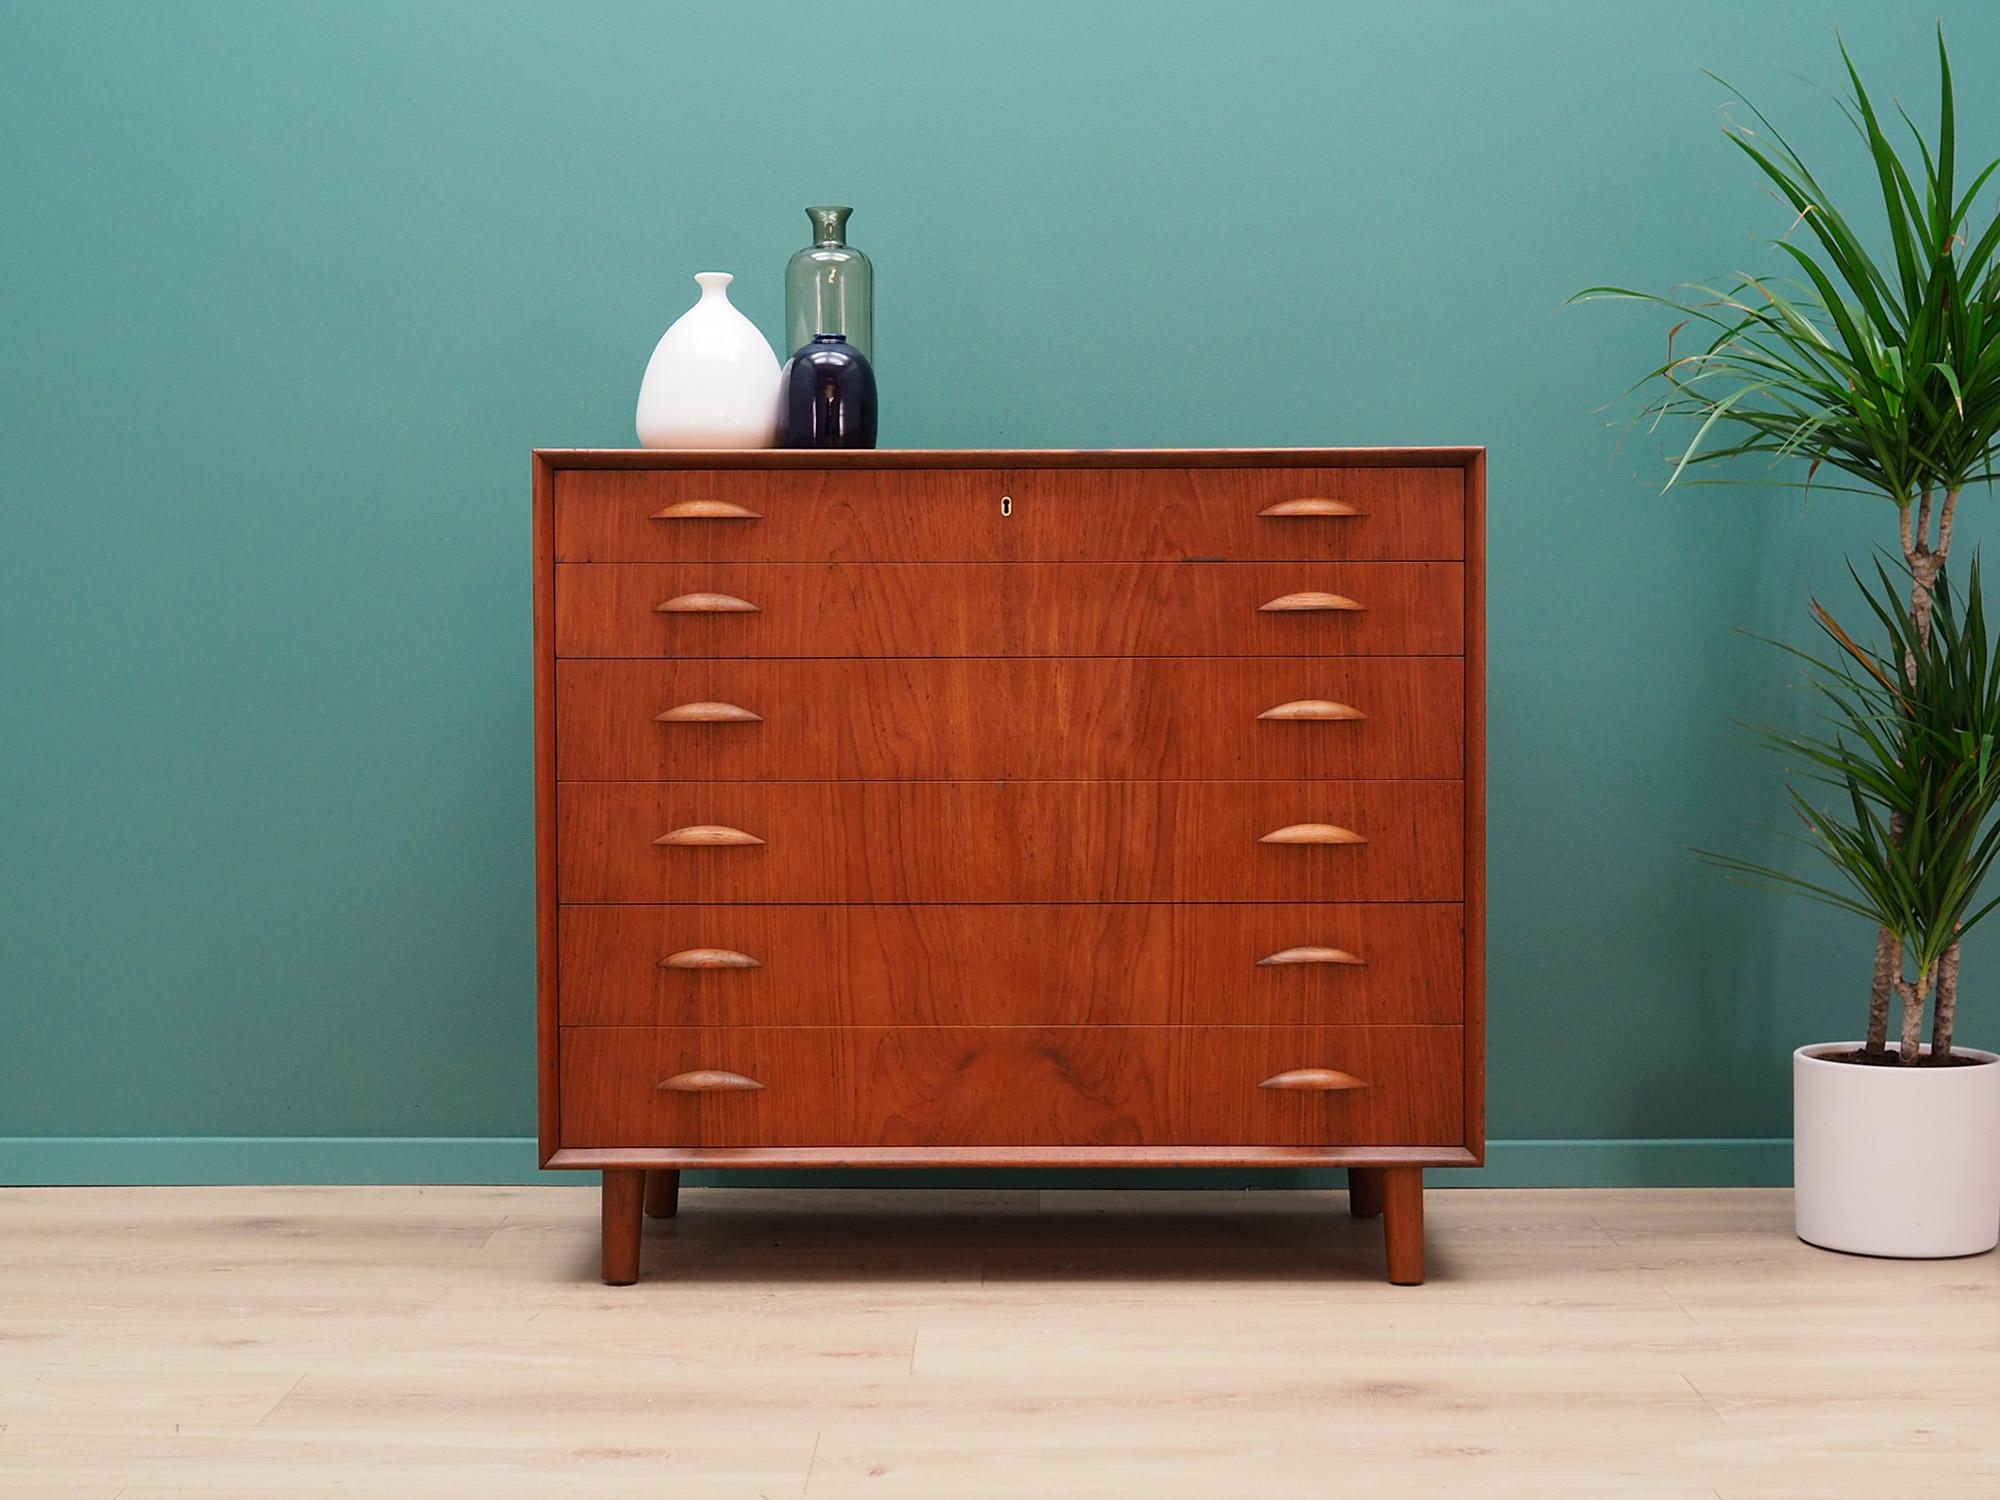 Phenomenal chest of drawers from the 1960s-1970s. Scandinavian design, Minimalist form. The surface of the furniture finished with teak veneer. The chest has six packed drawers. No key in the set. Preserved in good condition (small bruises and